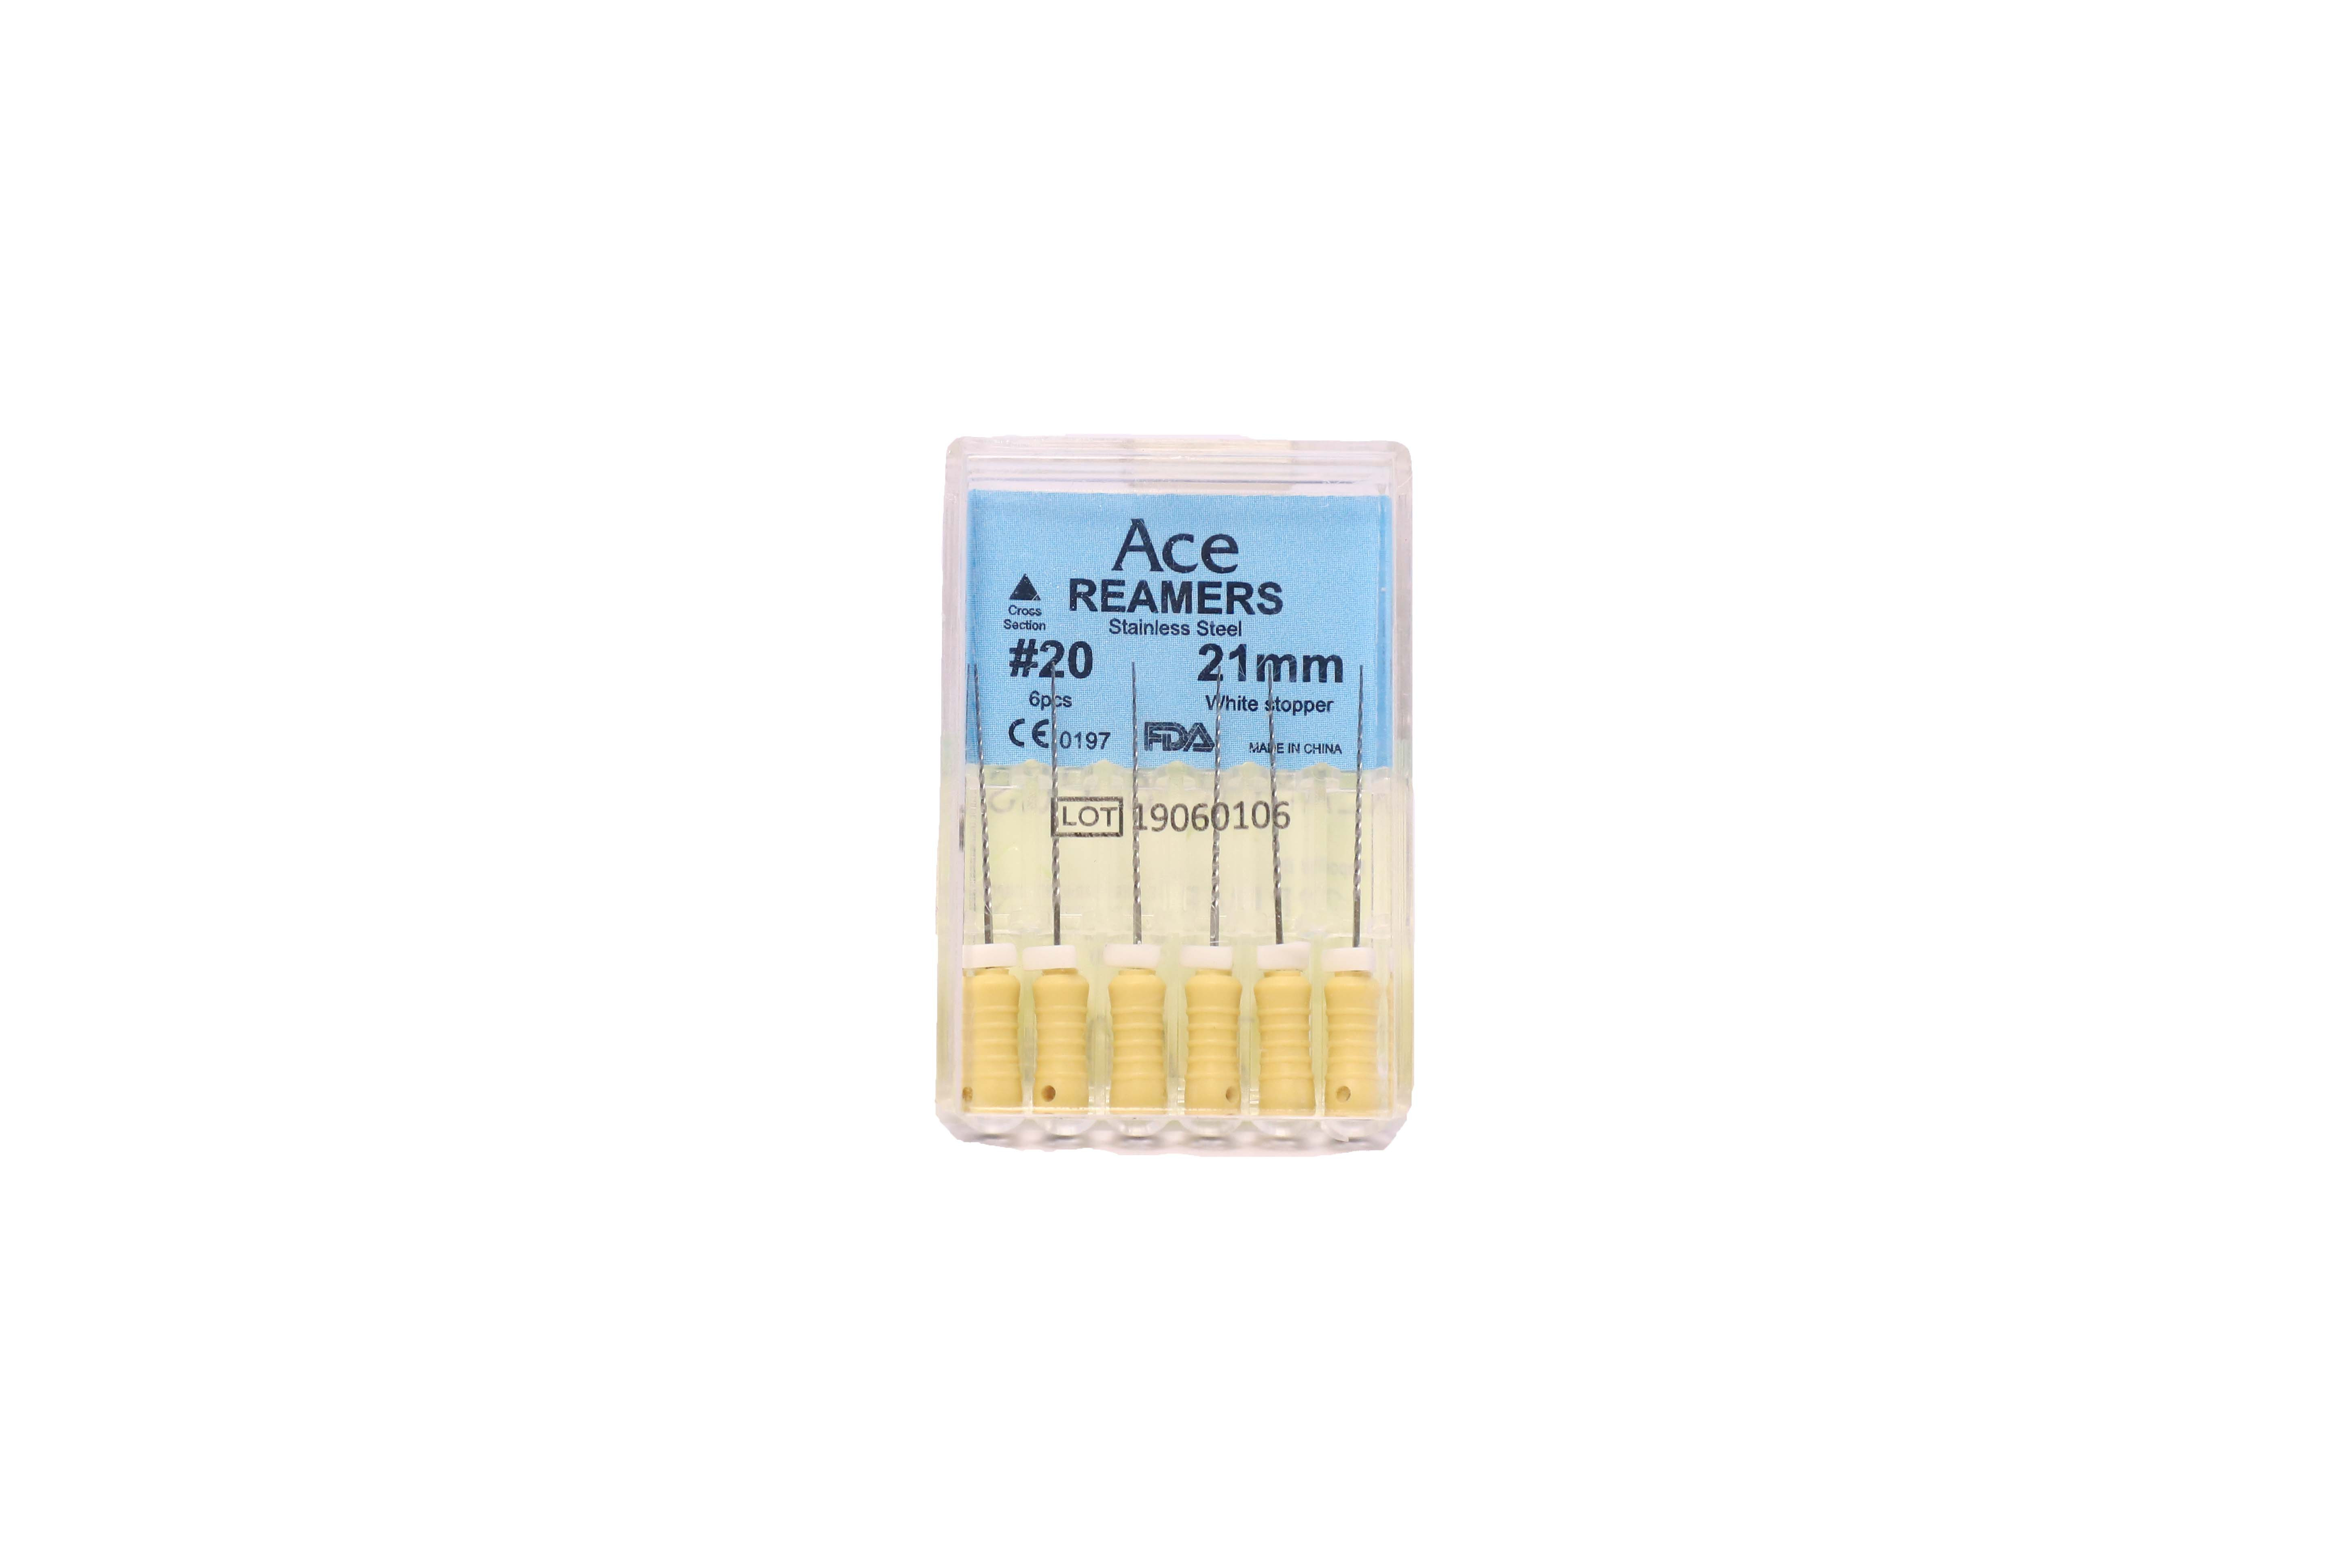 ACE Reamers #20, 21mm  (Pack of 5)